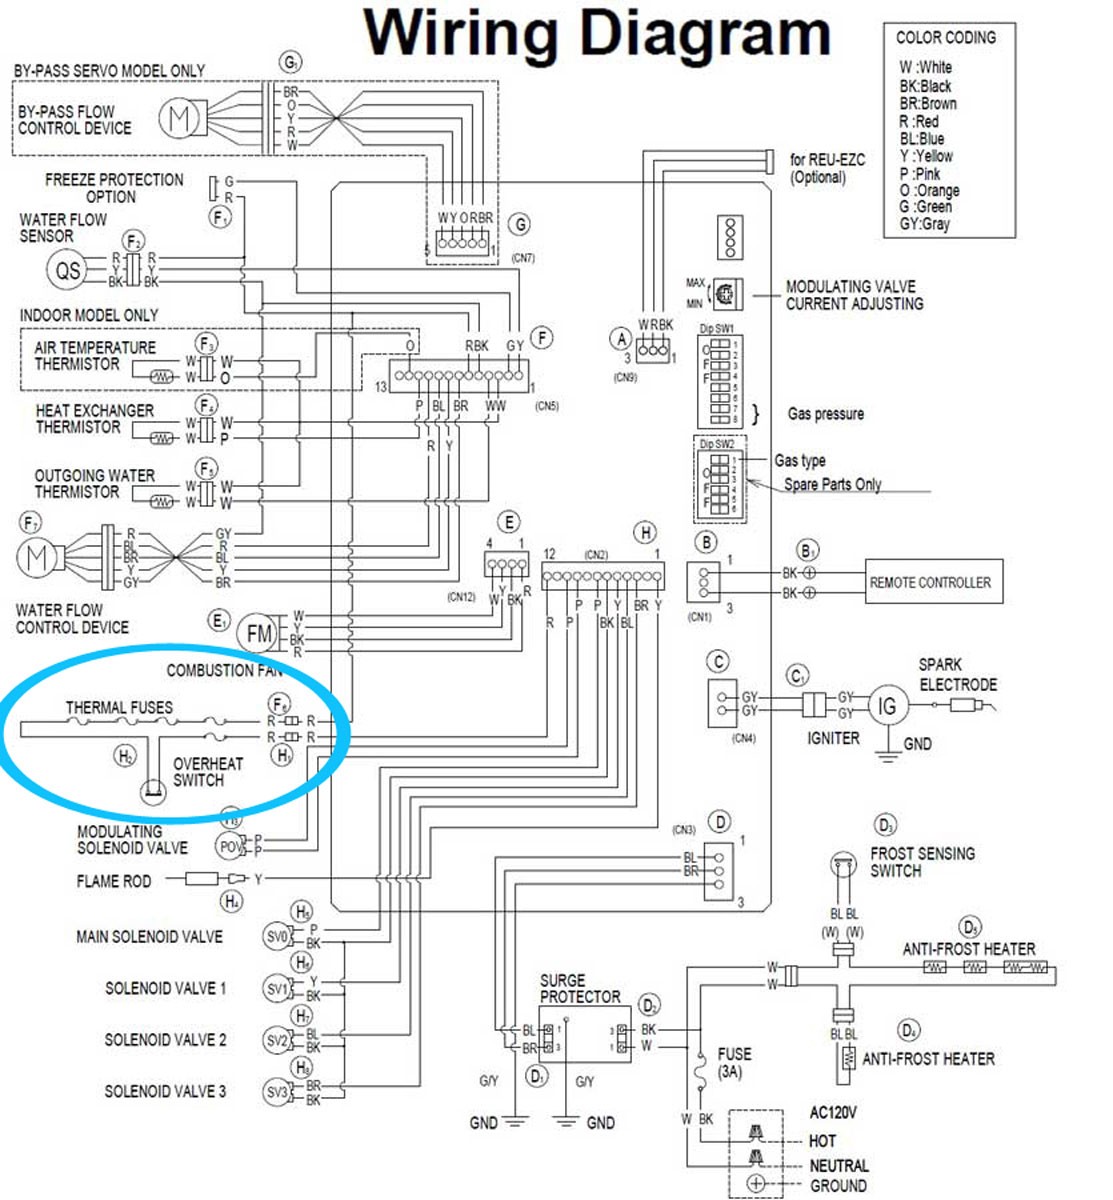 Check the electric troubleshoot from 2008 pdf